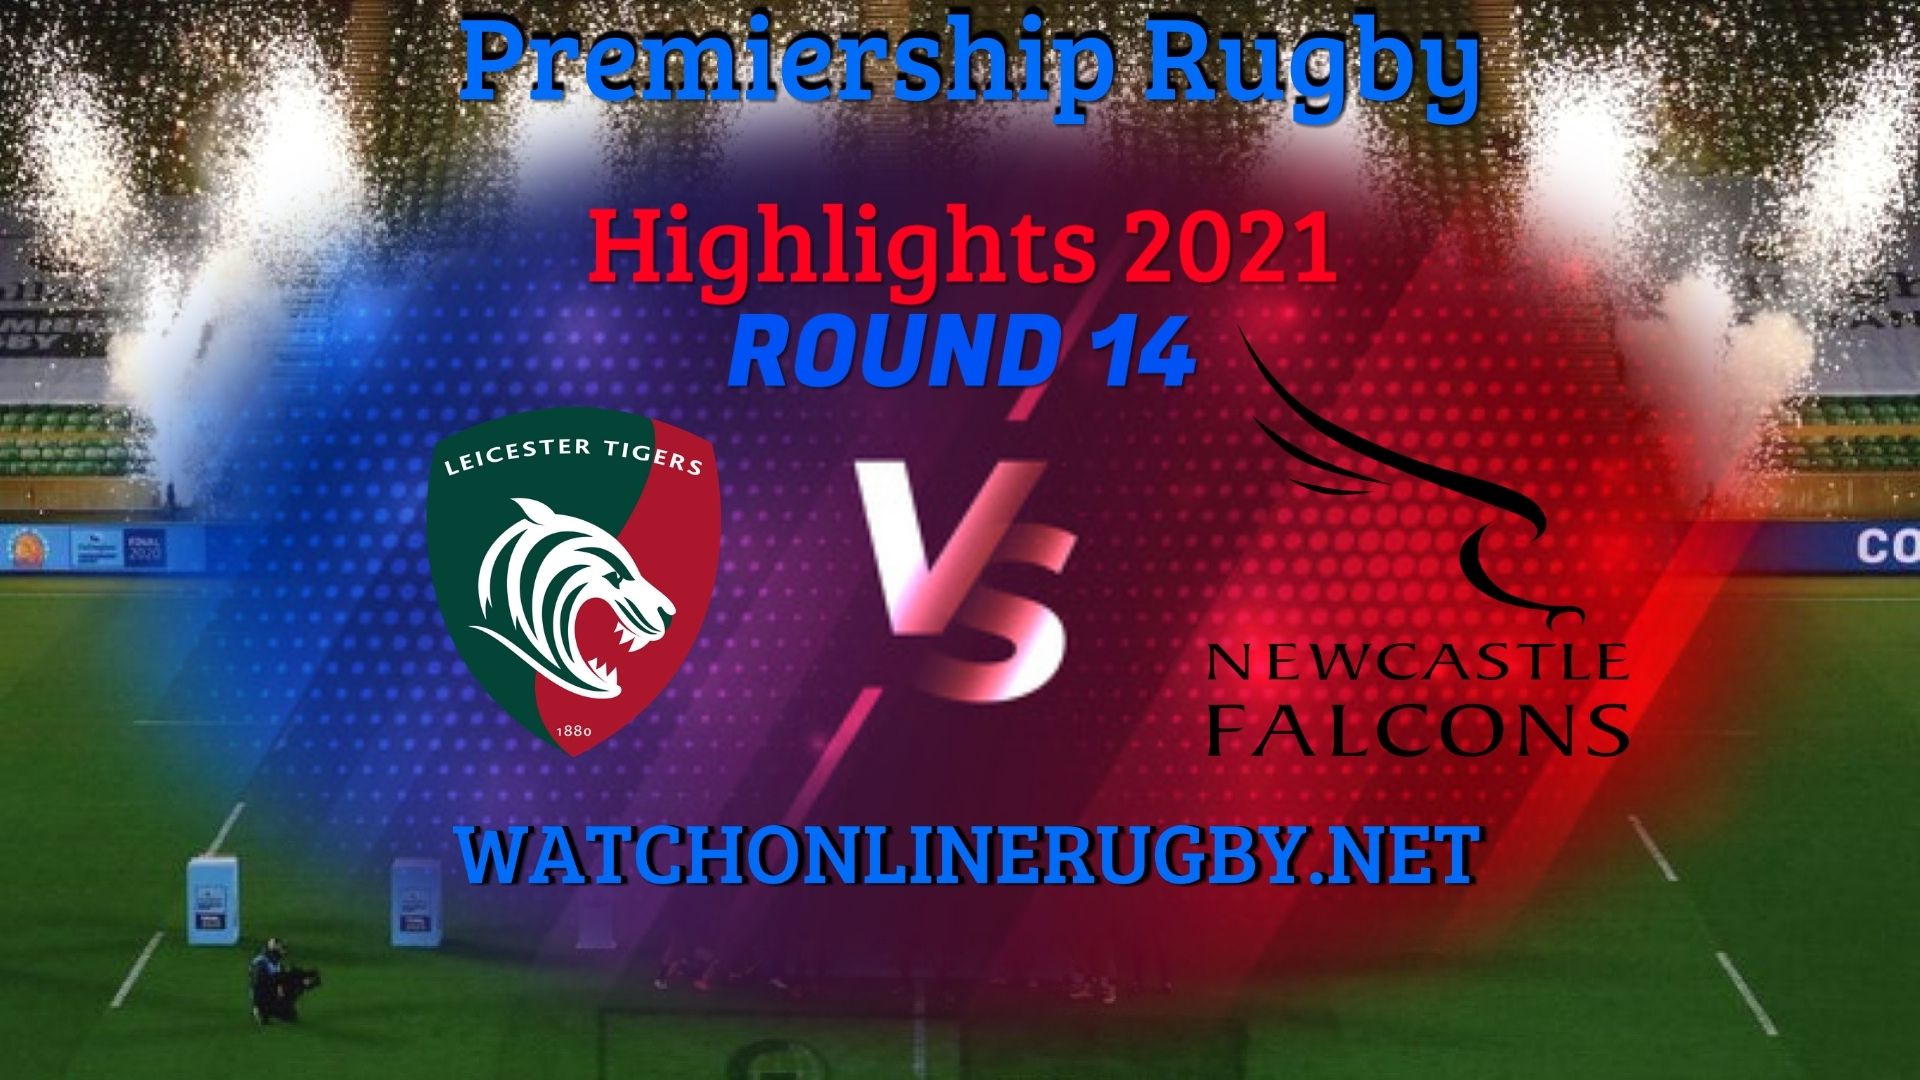 Leicester Tigers Vs Newcastle Falcons Premiership Rugby 2021 RD 15